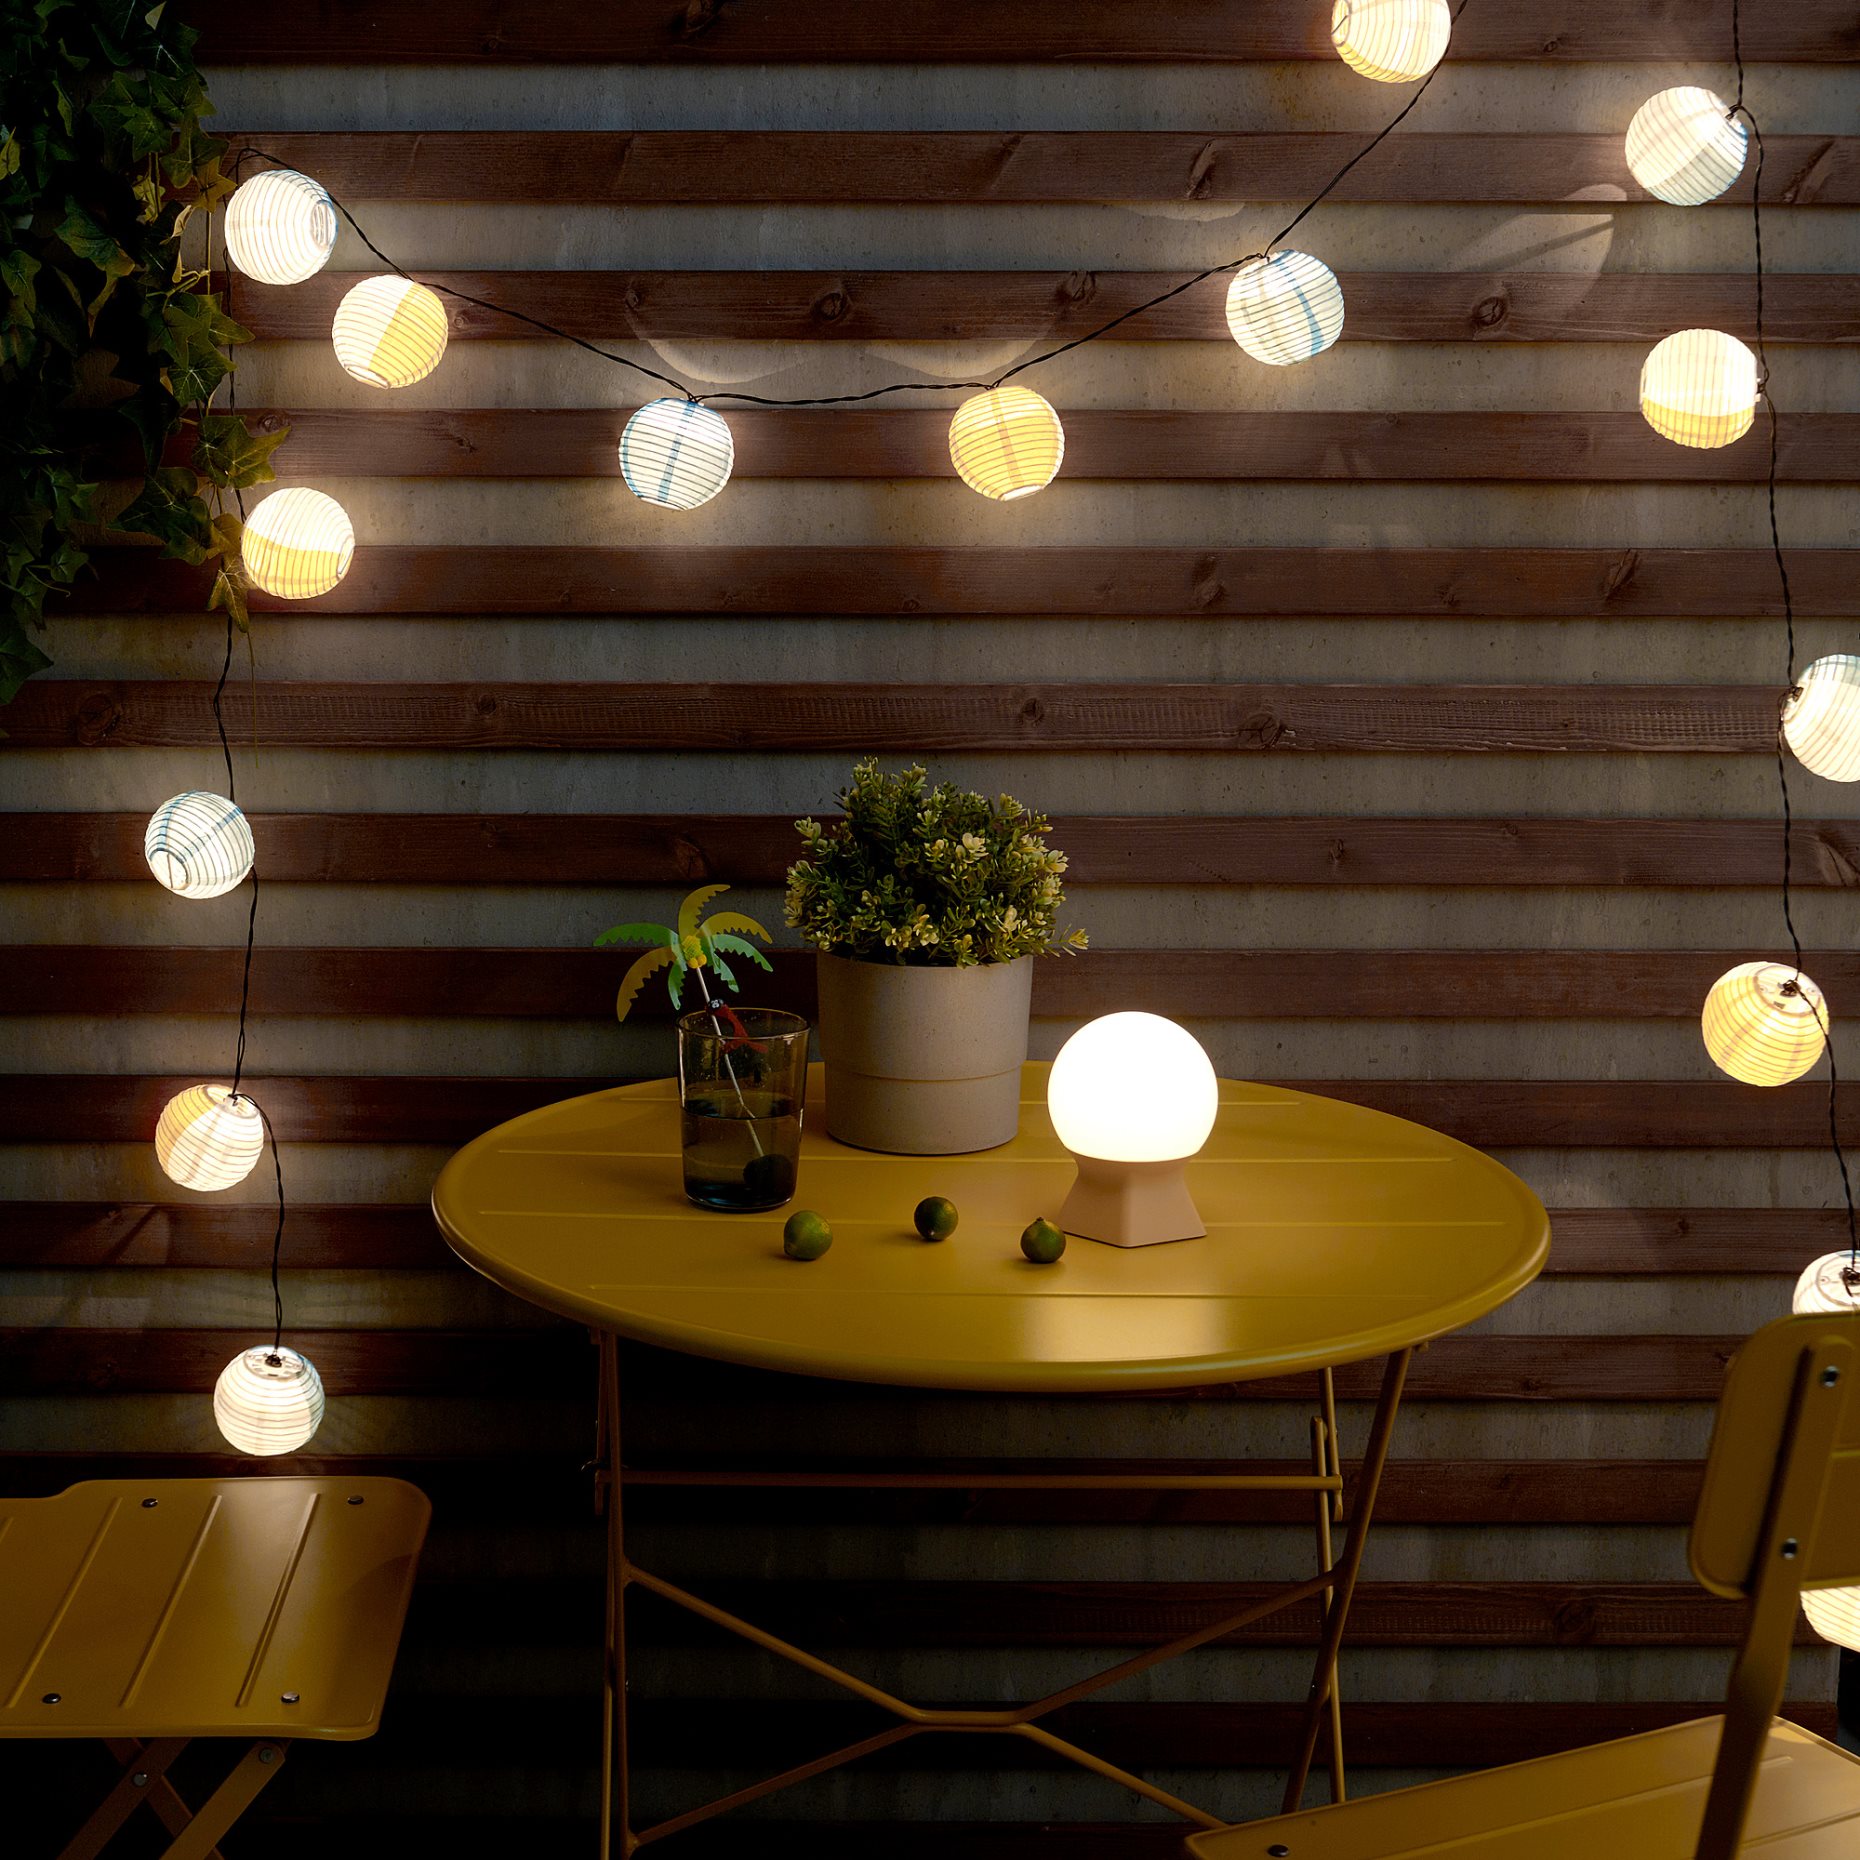 SOMMARLÅNKE, lighting chain with built-in LED light source/24 bulbs/outdoor/battery-operated, 105.446.33